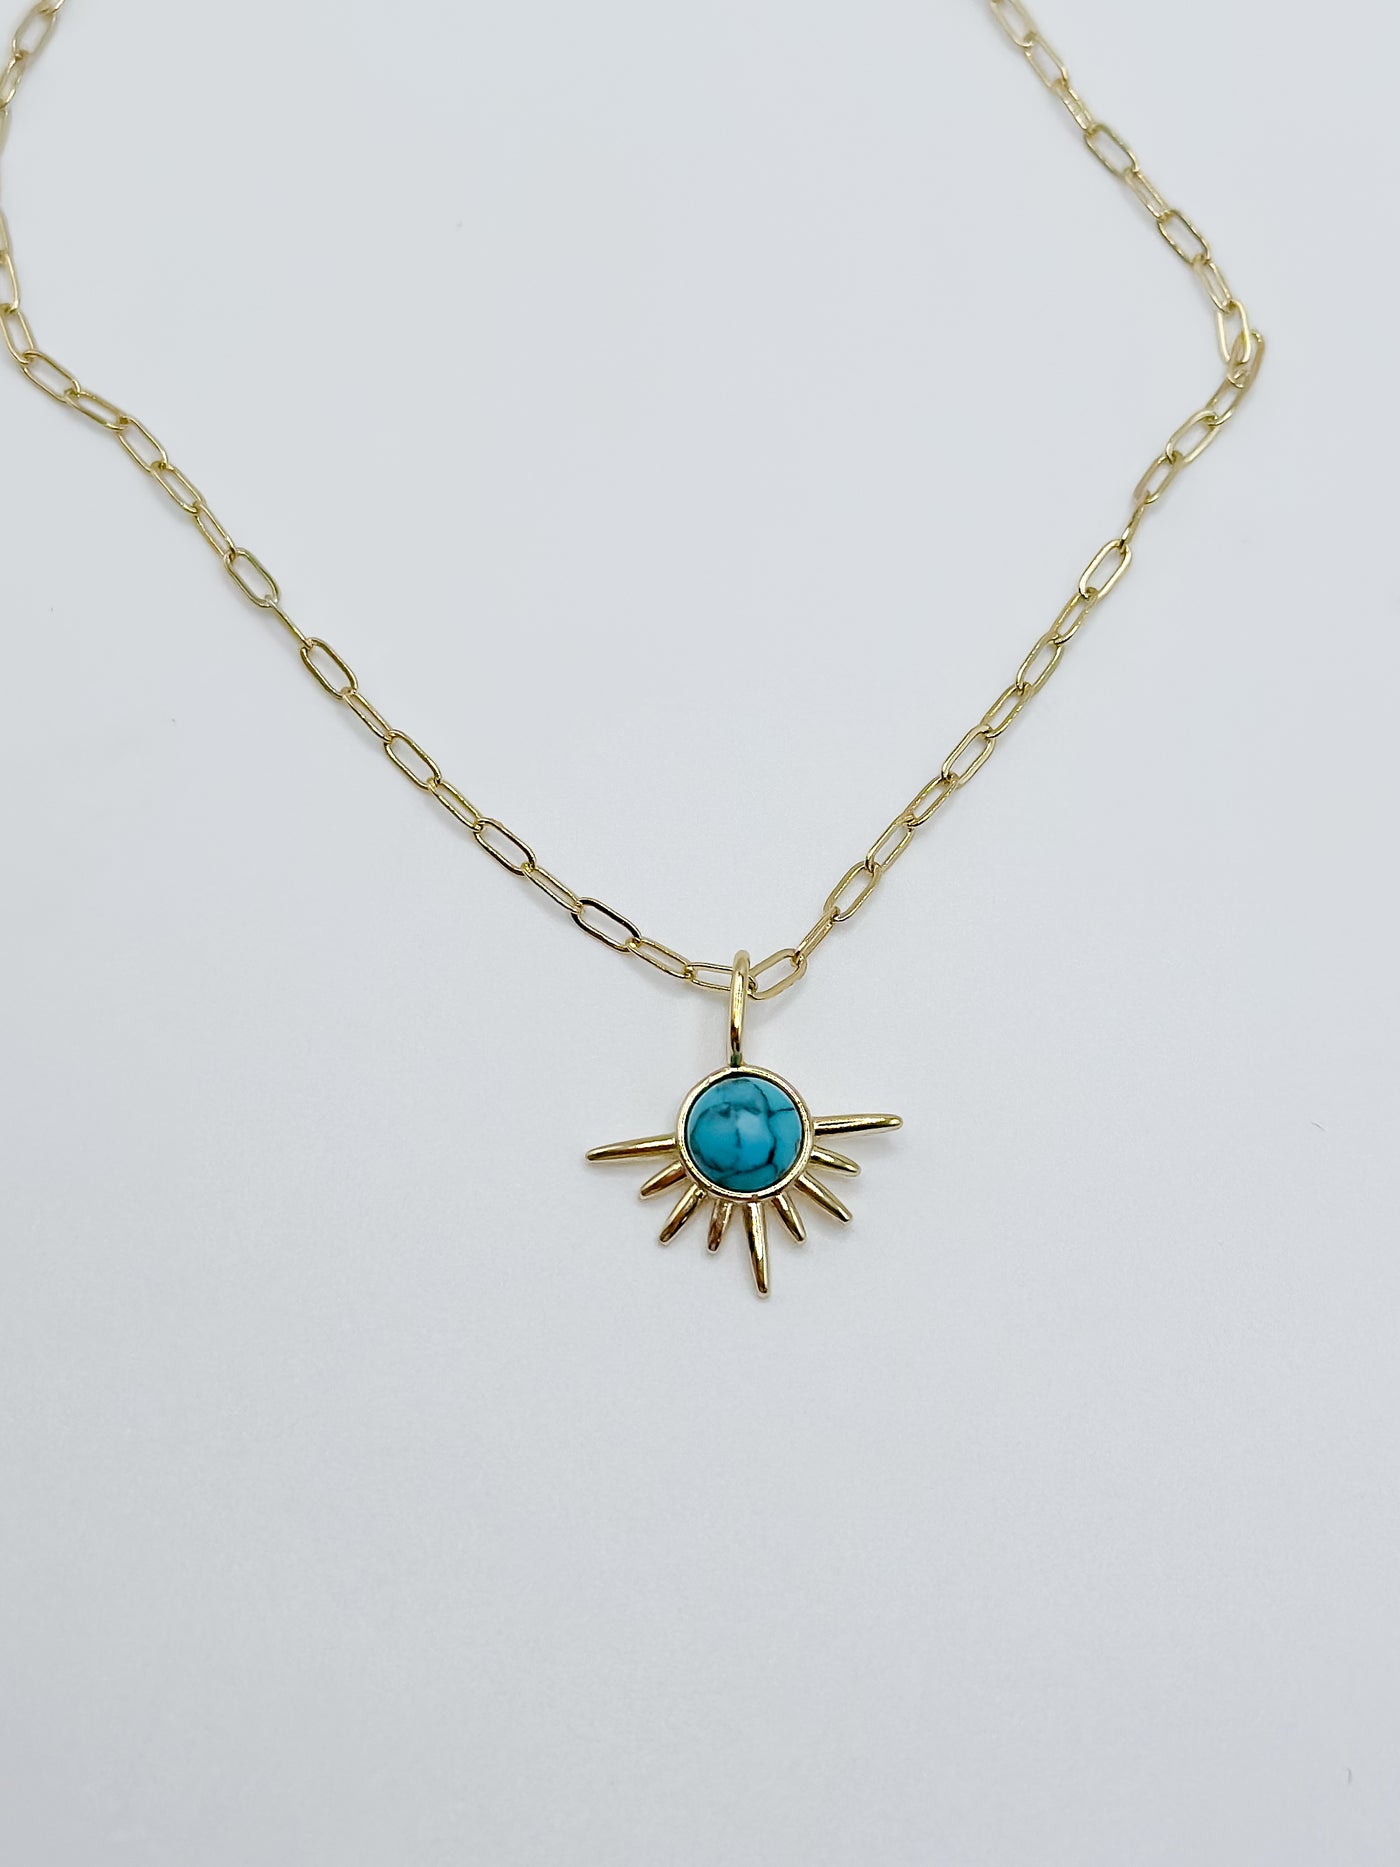 Gold/Turquoise Solstice Charm